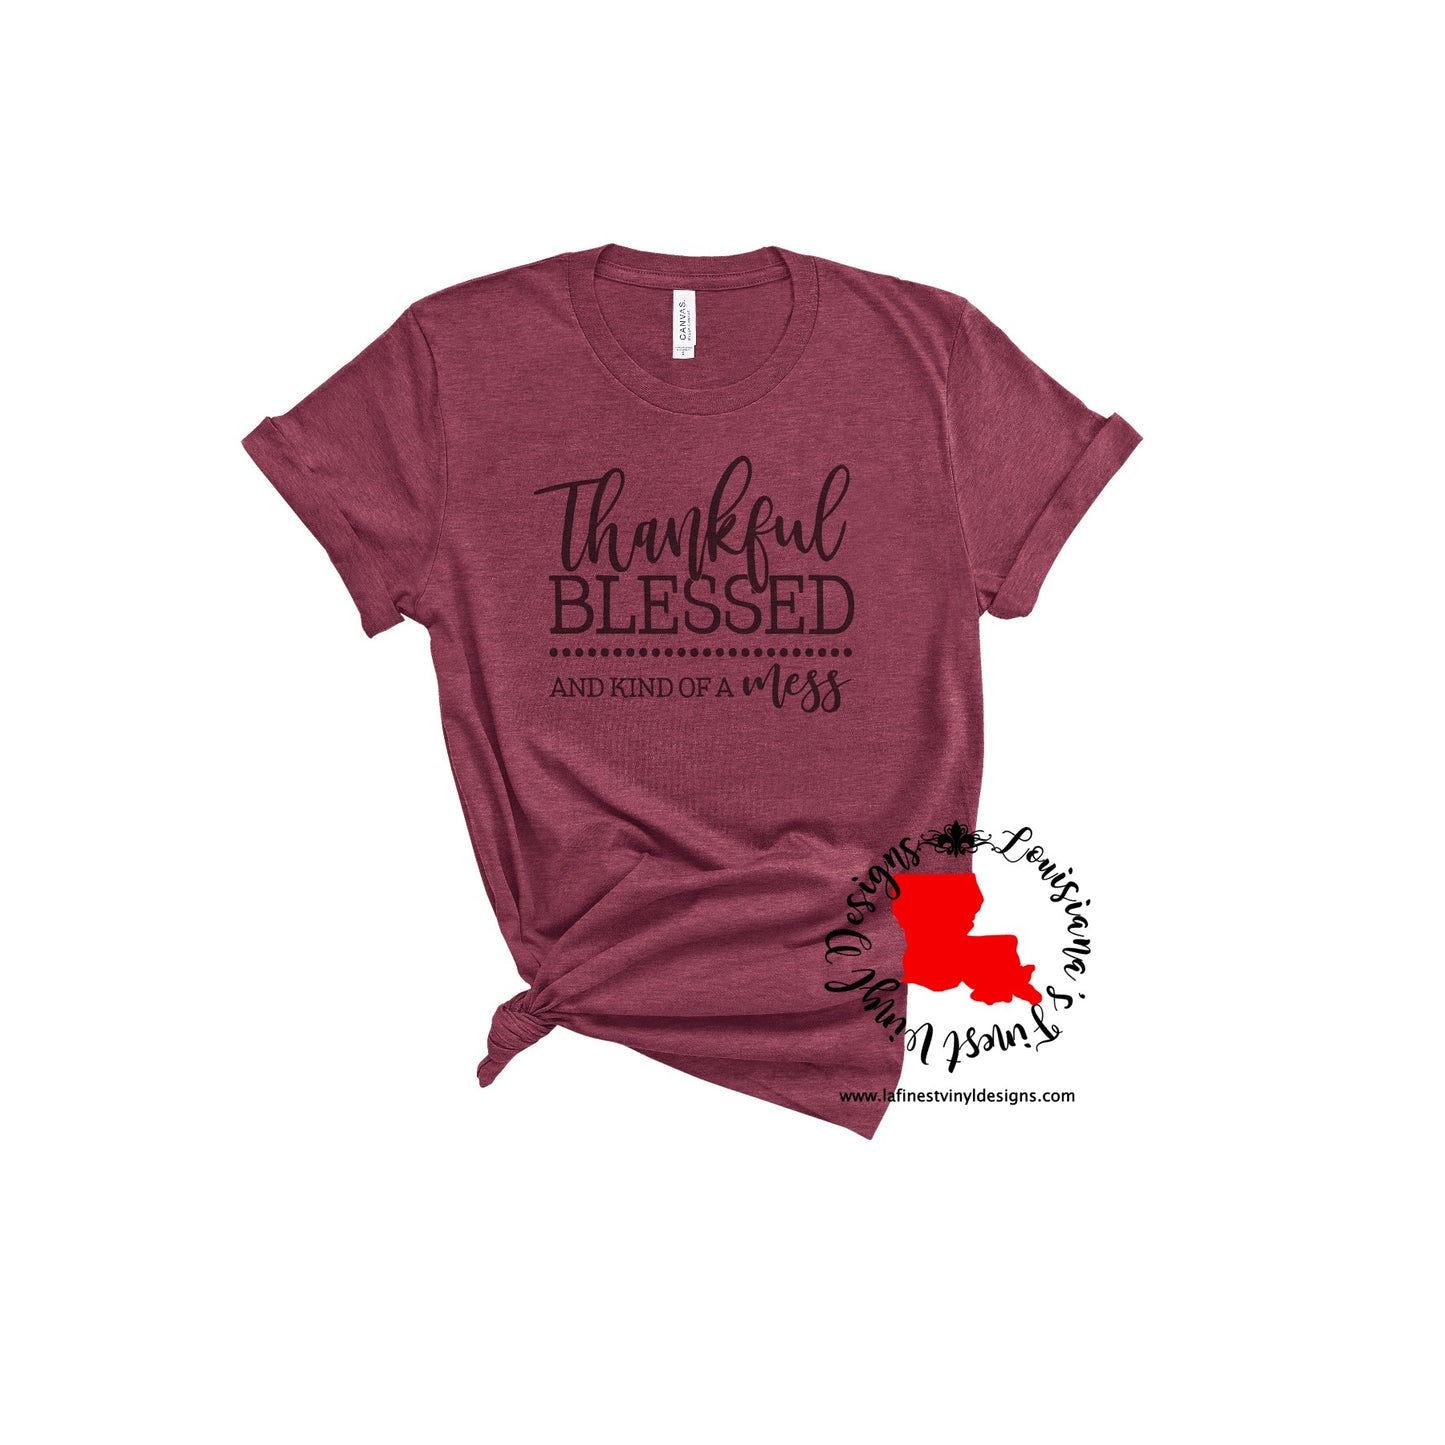 Thankful Blessed & Kind of A Mess Tee